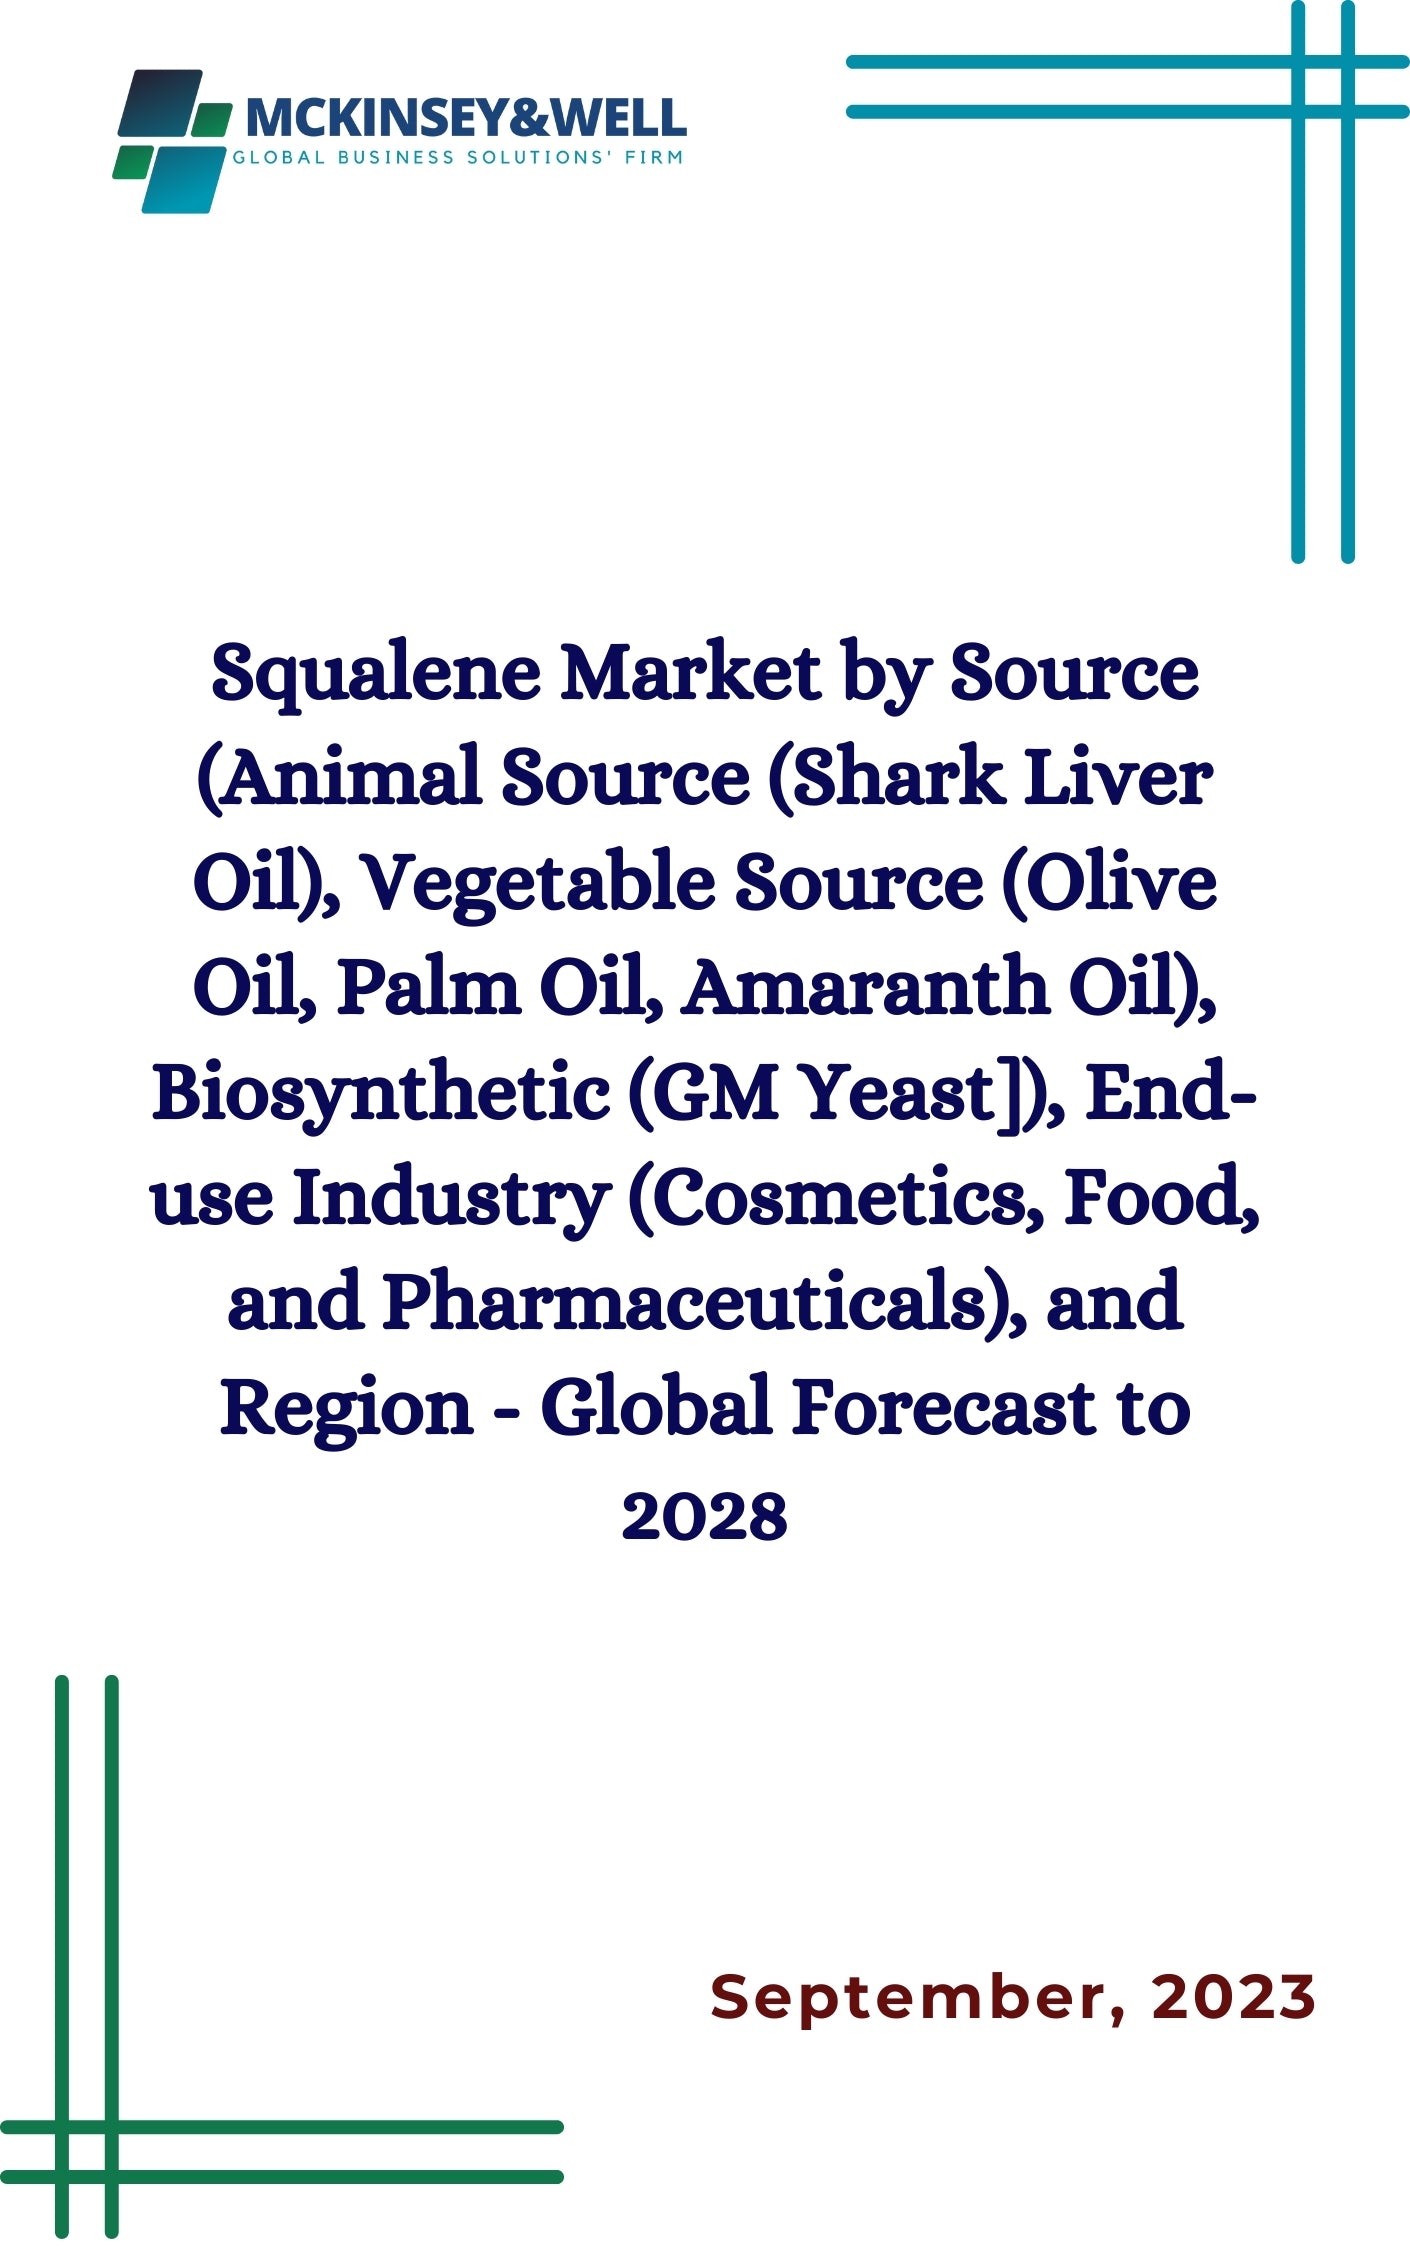 Squalene Market by Source (Animal Source (Shark Liver Oil), Vegetable Source (Olive Oil, Palm Oil, Amaranth Oil), Biosynthetic (GM Yeast]), End-use Industry (Cosmetics, Food, and Pharmaceuticals), and Region - Global Forecast to 2028